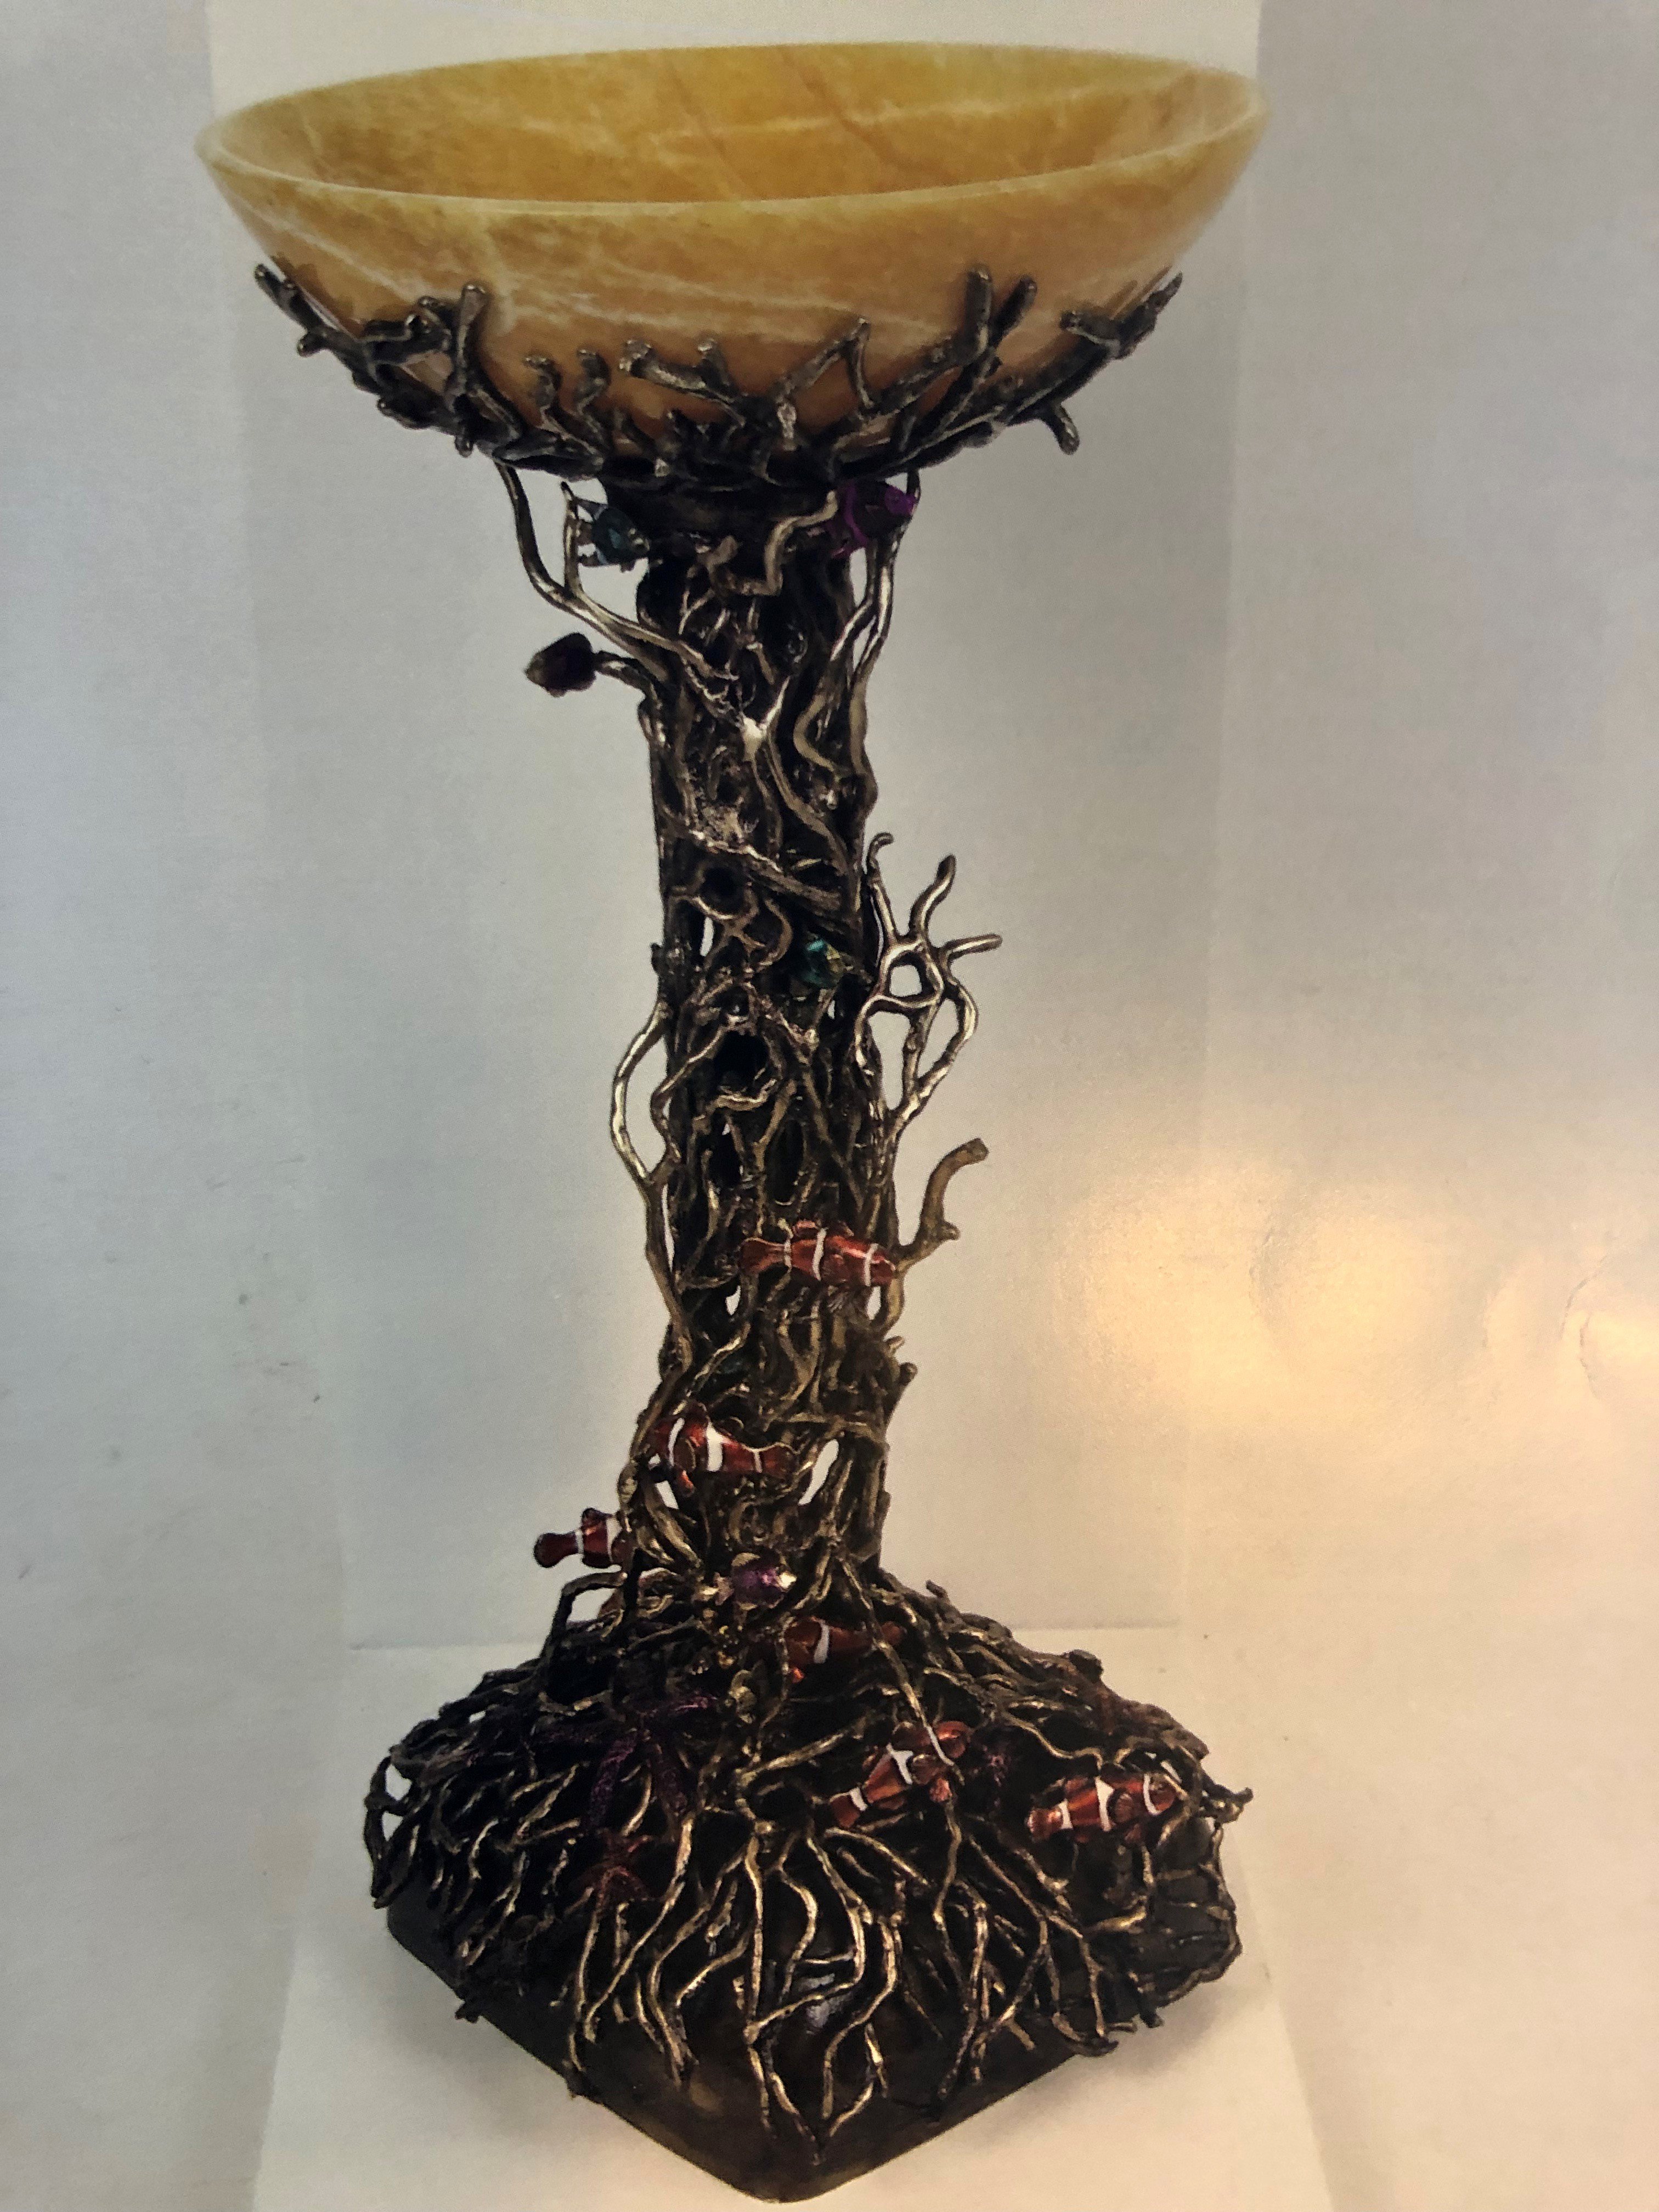 Joe Jumalon; Neptunes Palace, 2019, Original Sculpture Bronze, 18 x 35 inches. Artwork description: 241 The Neptunes Palace pedestal with bowl is a limited edition of exquisite functional art.  This multi- purpose honey onyx bowl mounts on lavish solid cast bronze pedestal with intricately hand cast sea creatures throughout that are hand painted by the artist.  Note All cast bronze art pieces ...